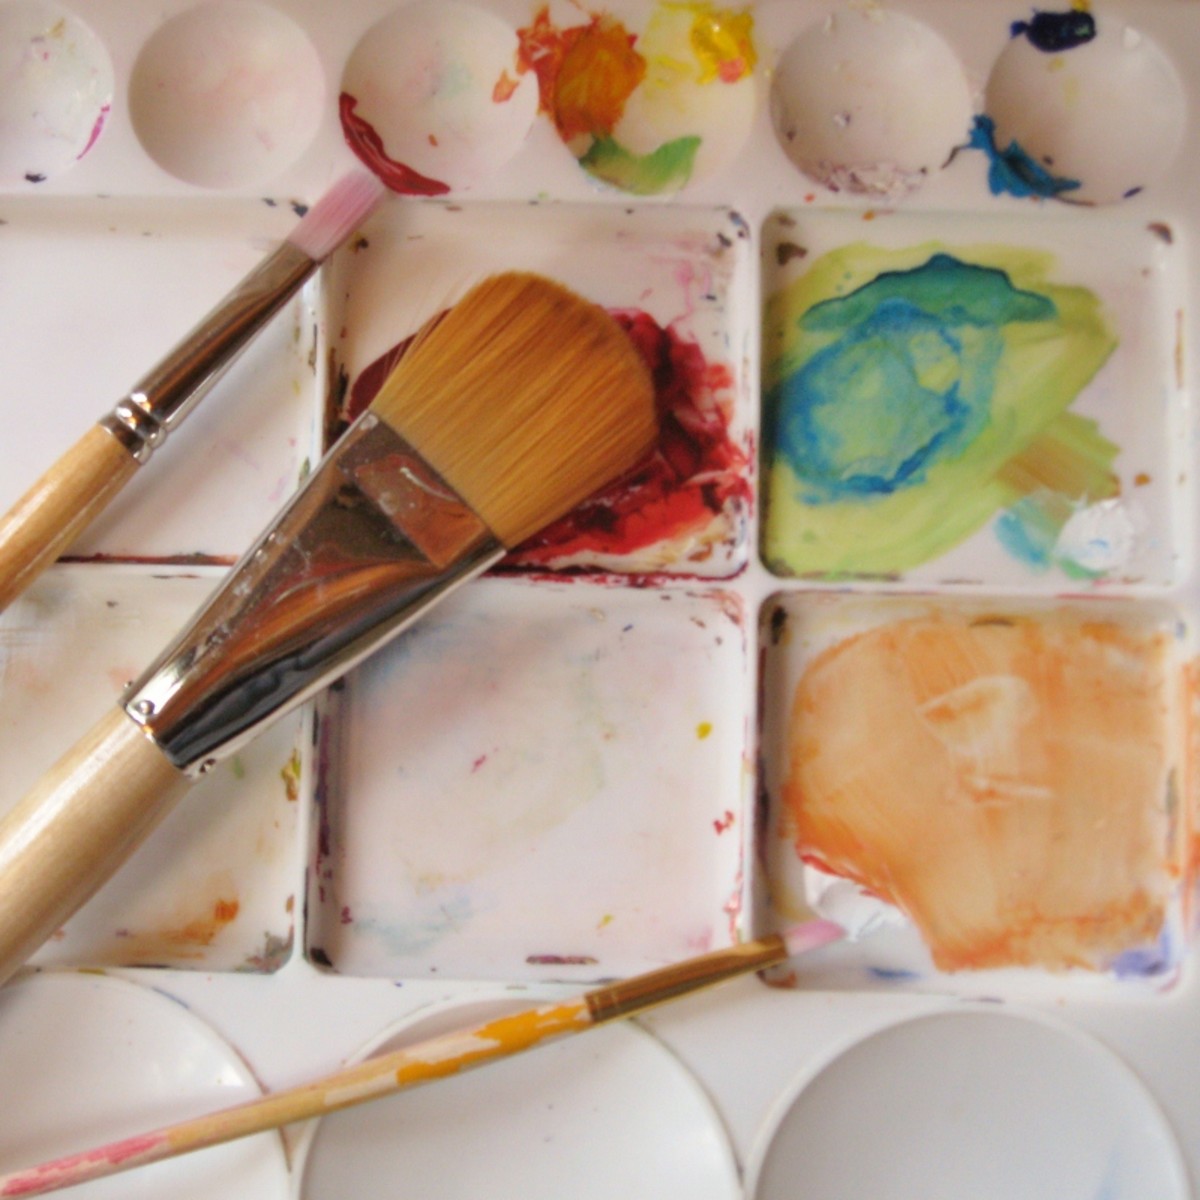 Brushes and a plastic mixing palette.